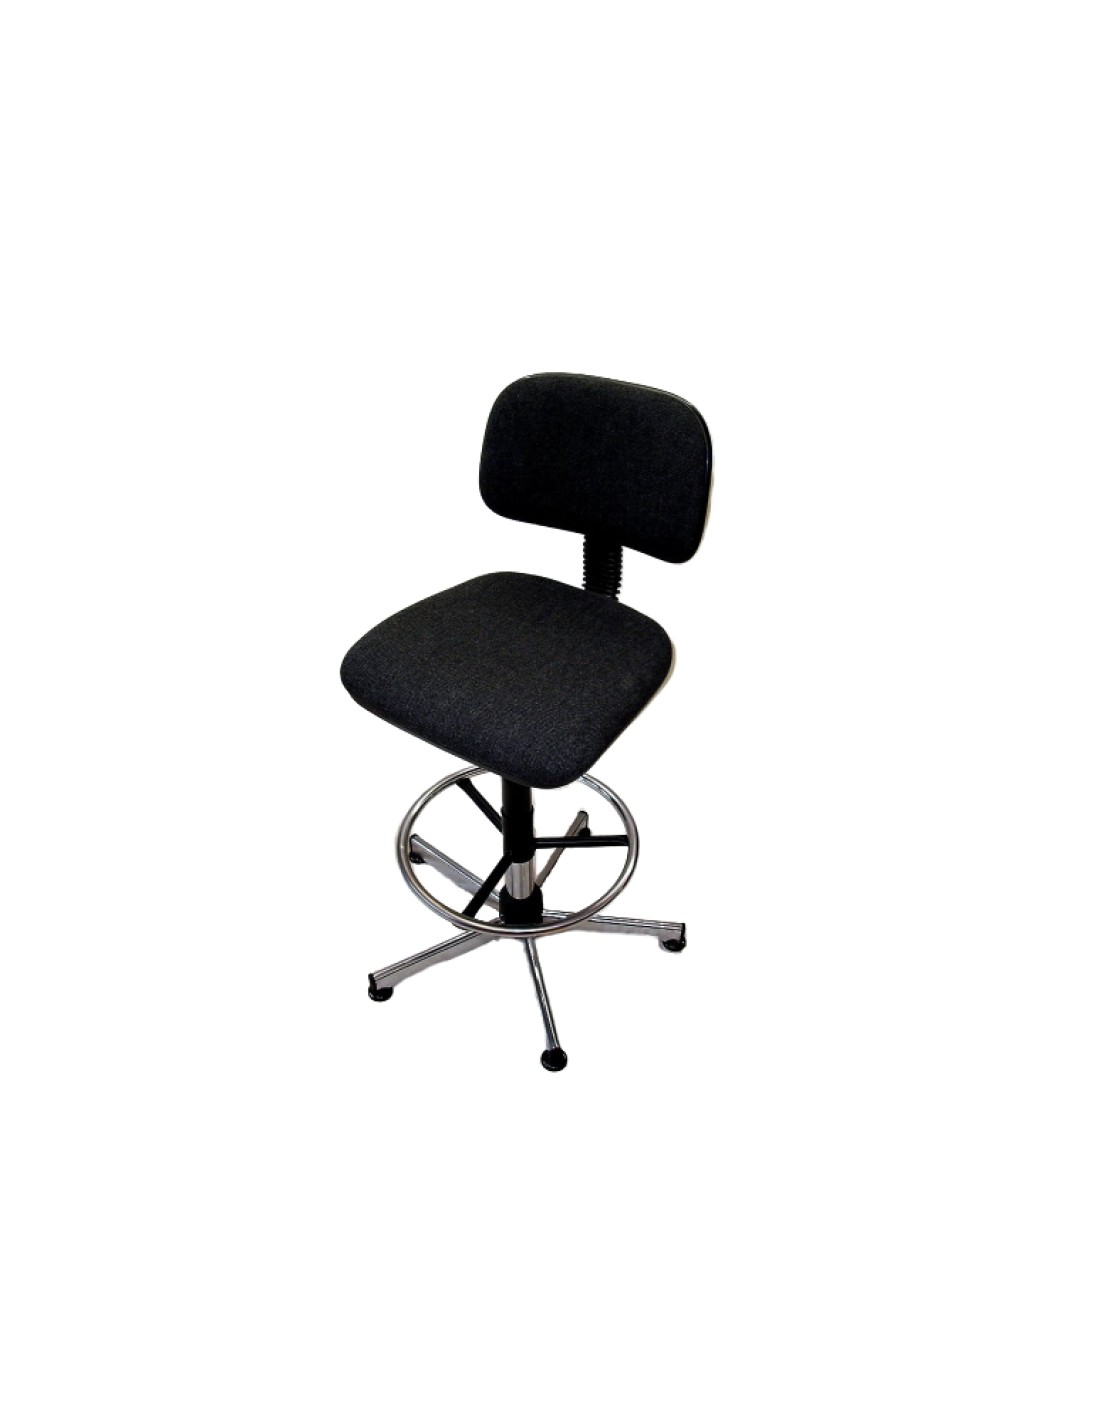 Padded stool with backrest